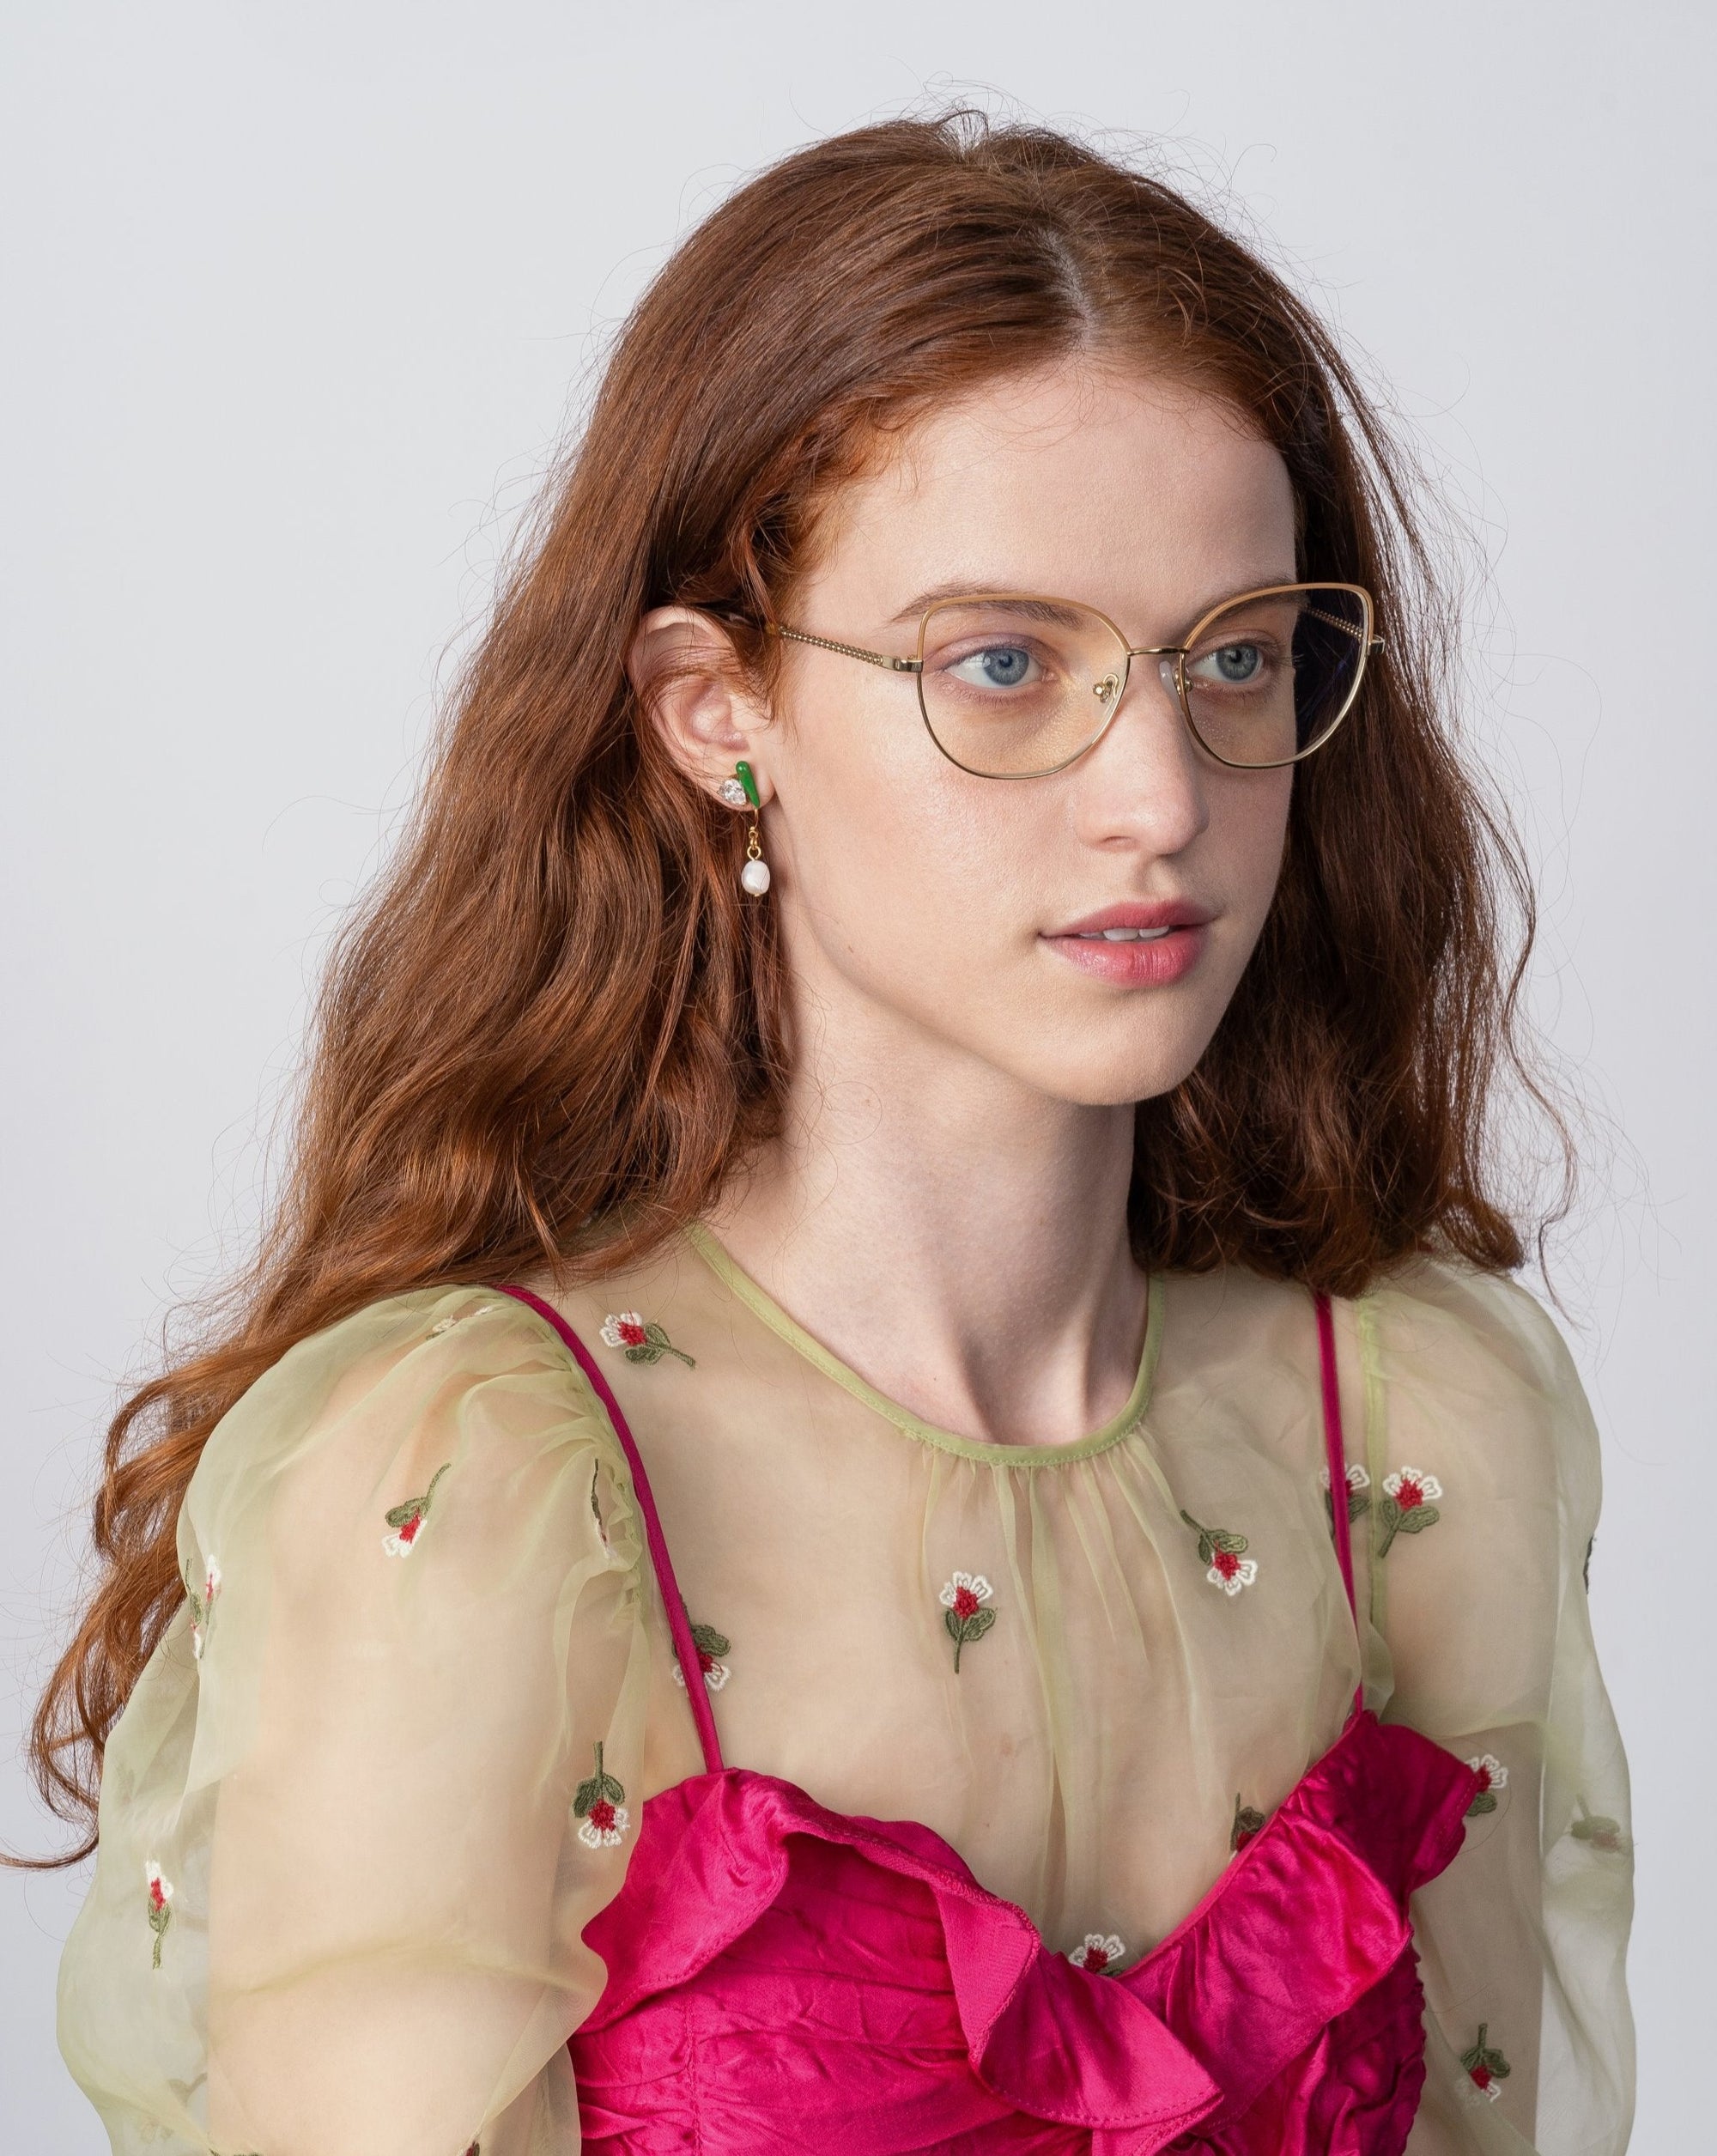 A woman with long, wavy red hair and glasses with a cat-eye silhouette is wearing a sheer green top adorned with small floral designs over a bright pink dress. She has a calm expression and is looking slightly to the side, wearing the Ophelia by For Art&#39;s Sake®. The background is plain and light-colored.